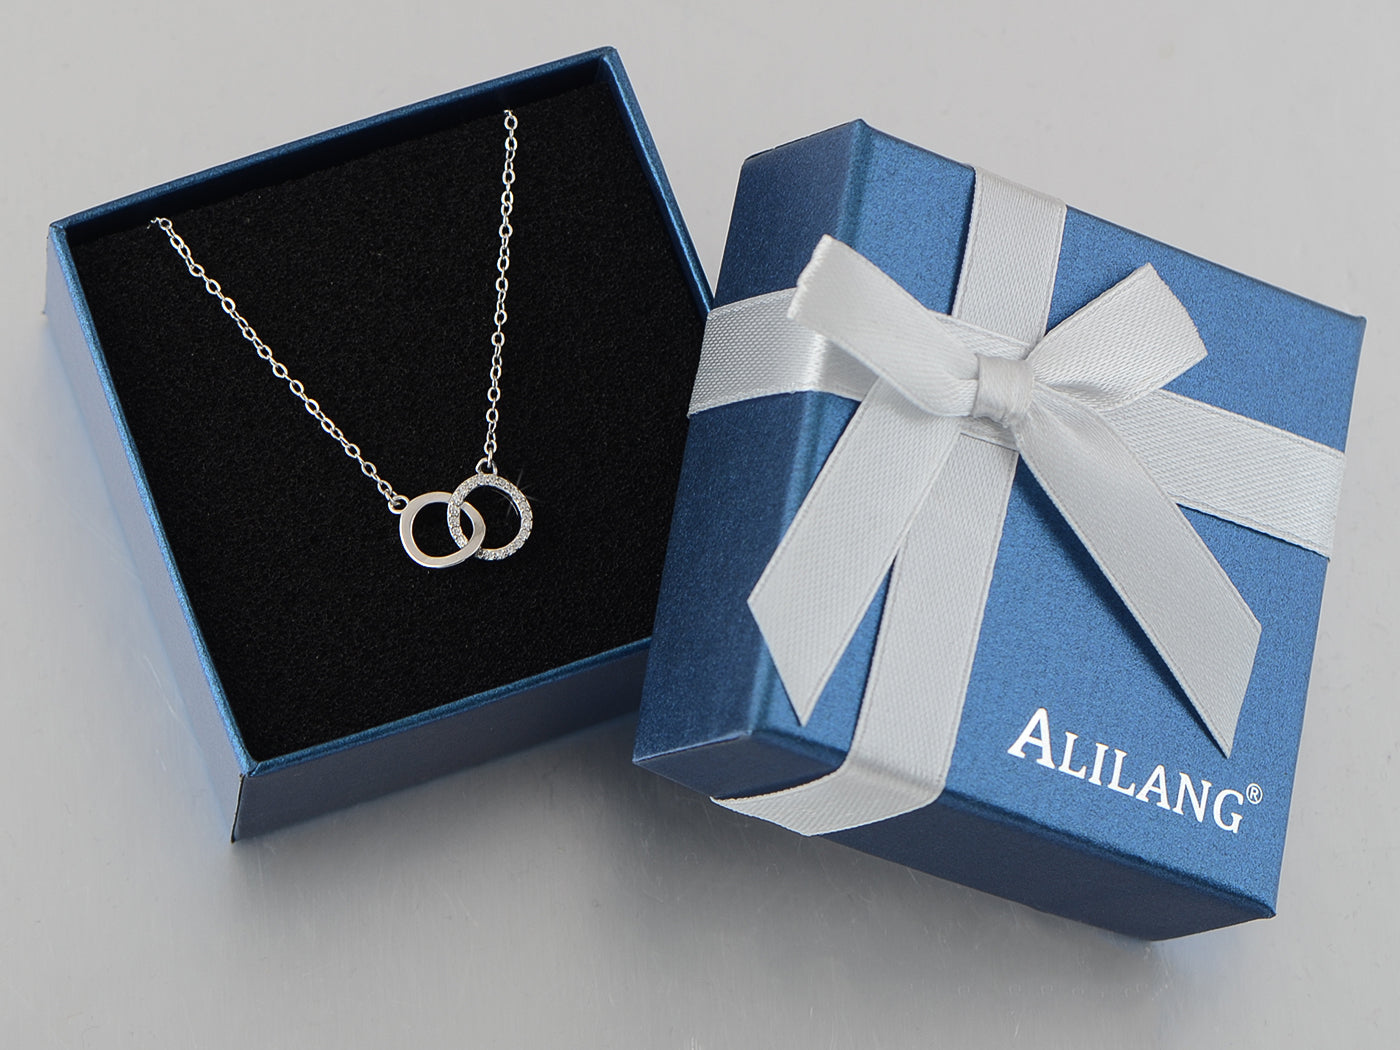 Alilang Sterling Silver Necklace Interlocking Infinity Double Circles Pendant Necklace Dainty Karma Choker Jewelry Gift for Women